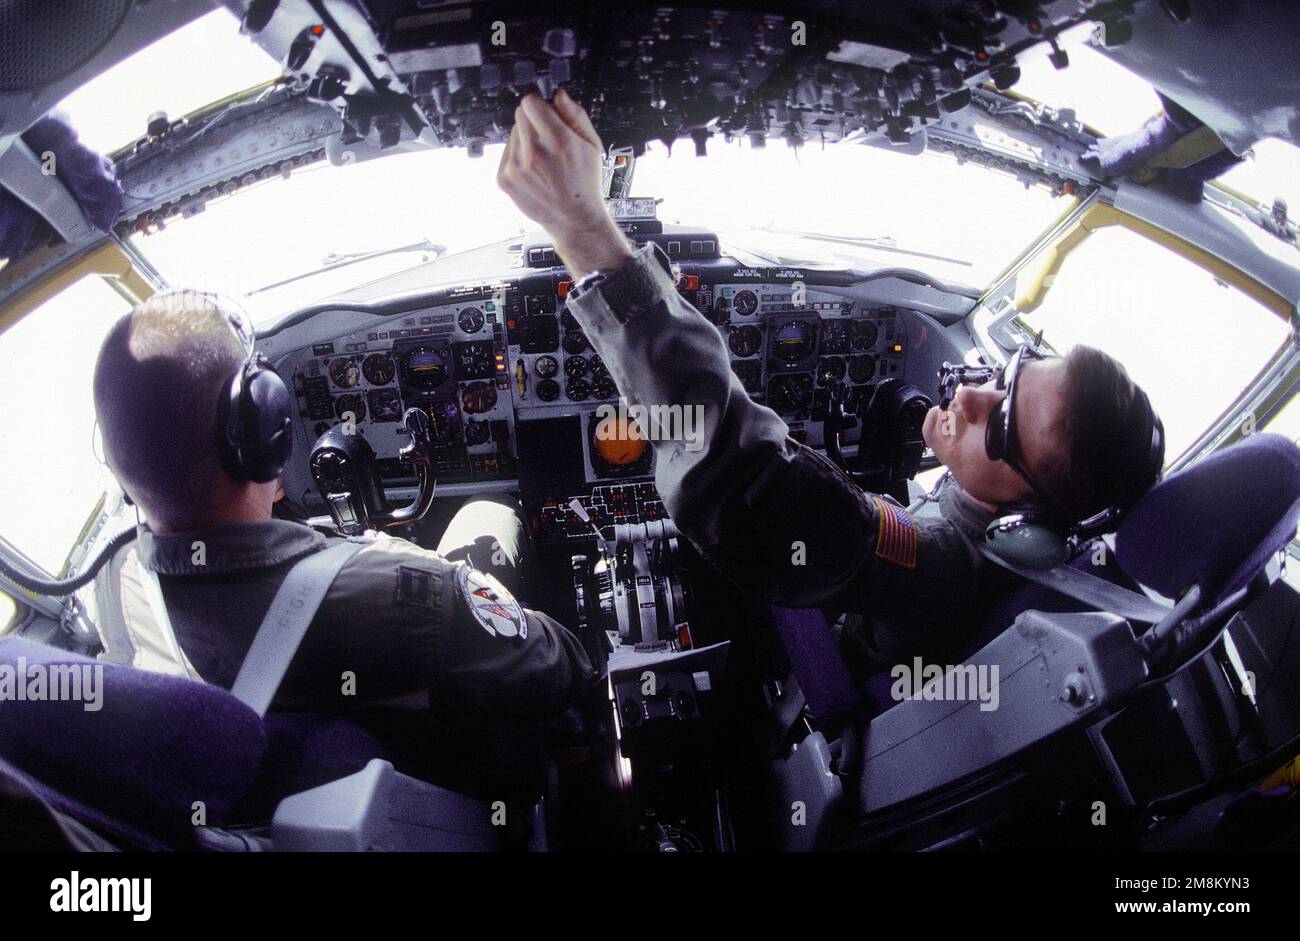 Pilots, Captain Matt T. Stephens (Left, Hometown: Hazlet, New Jersey) and 1ST Lieutenant Ken A. Shugart (Right, Hometown: Desota Texas) from the 96th Air Refueling Squadron, Fairchild Air Force Base, Washington, in the cockpit preflight their KC-135 aircraft prior to a refueling mission over Jordan in support of the Air Power Expeditionary Force. An ancillary mission of the Force is to assist US Air Force and other multinational forces operating in Saudi Arabia and other nearby countries patrol the no-fly zone over southern Iraq. Subject Operation/Series: AIR POWER EXPEDITIONARY FORCE Country: Stock Photo